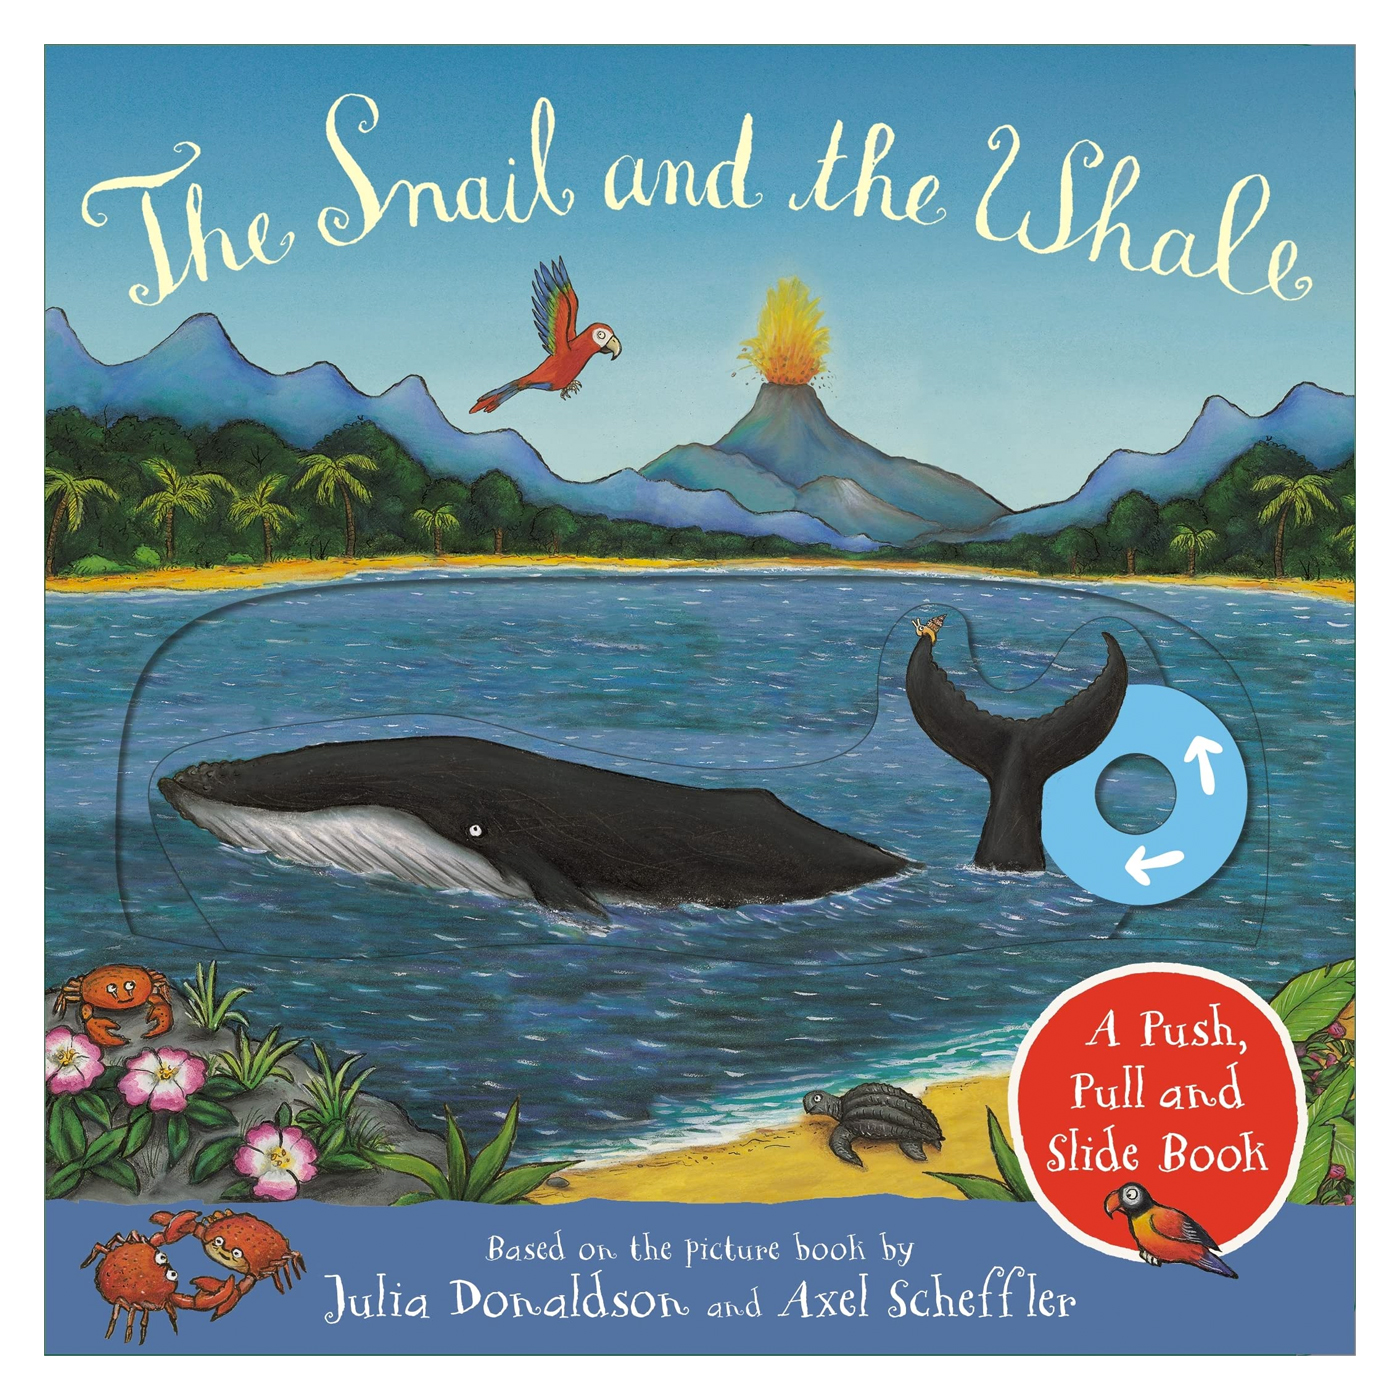 PAN MACMILLAN The Snail and the Whale: A Push, Pull and Slide Book